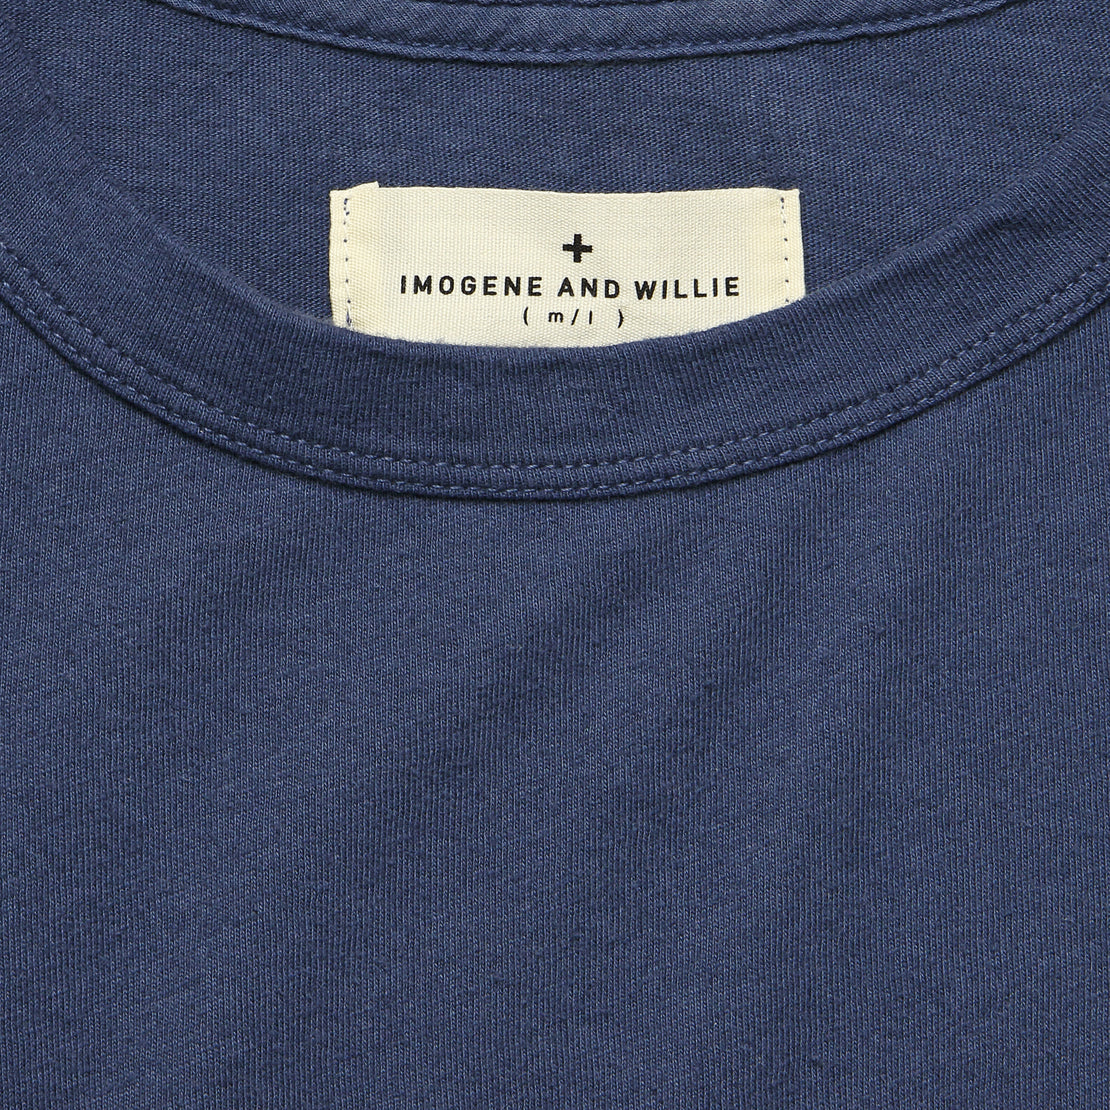 Drop Tee - Faded Blue - Imogene + Willie - STAG Provisions - W - Tops - S/S Tee